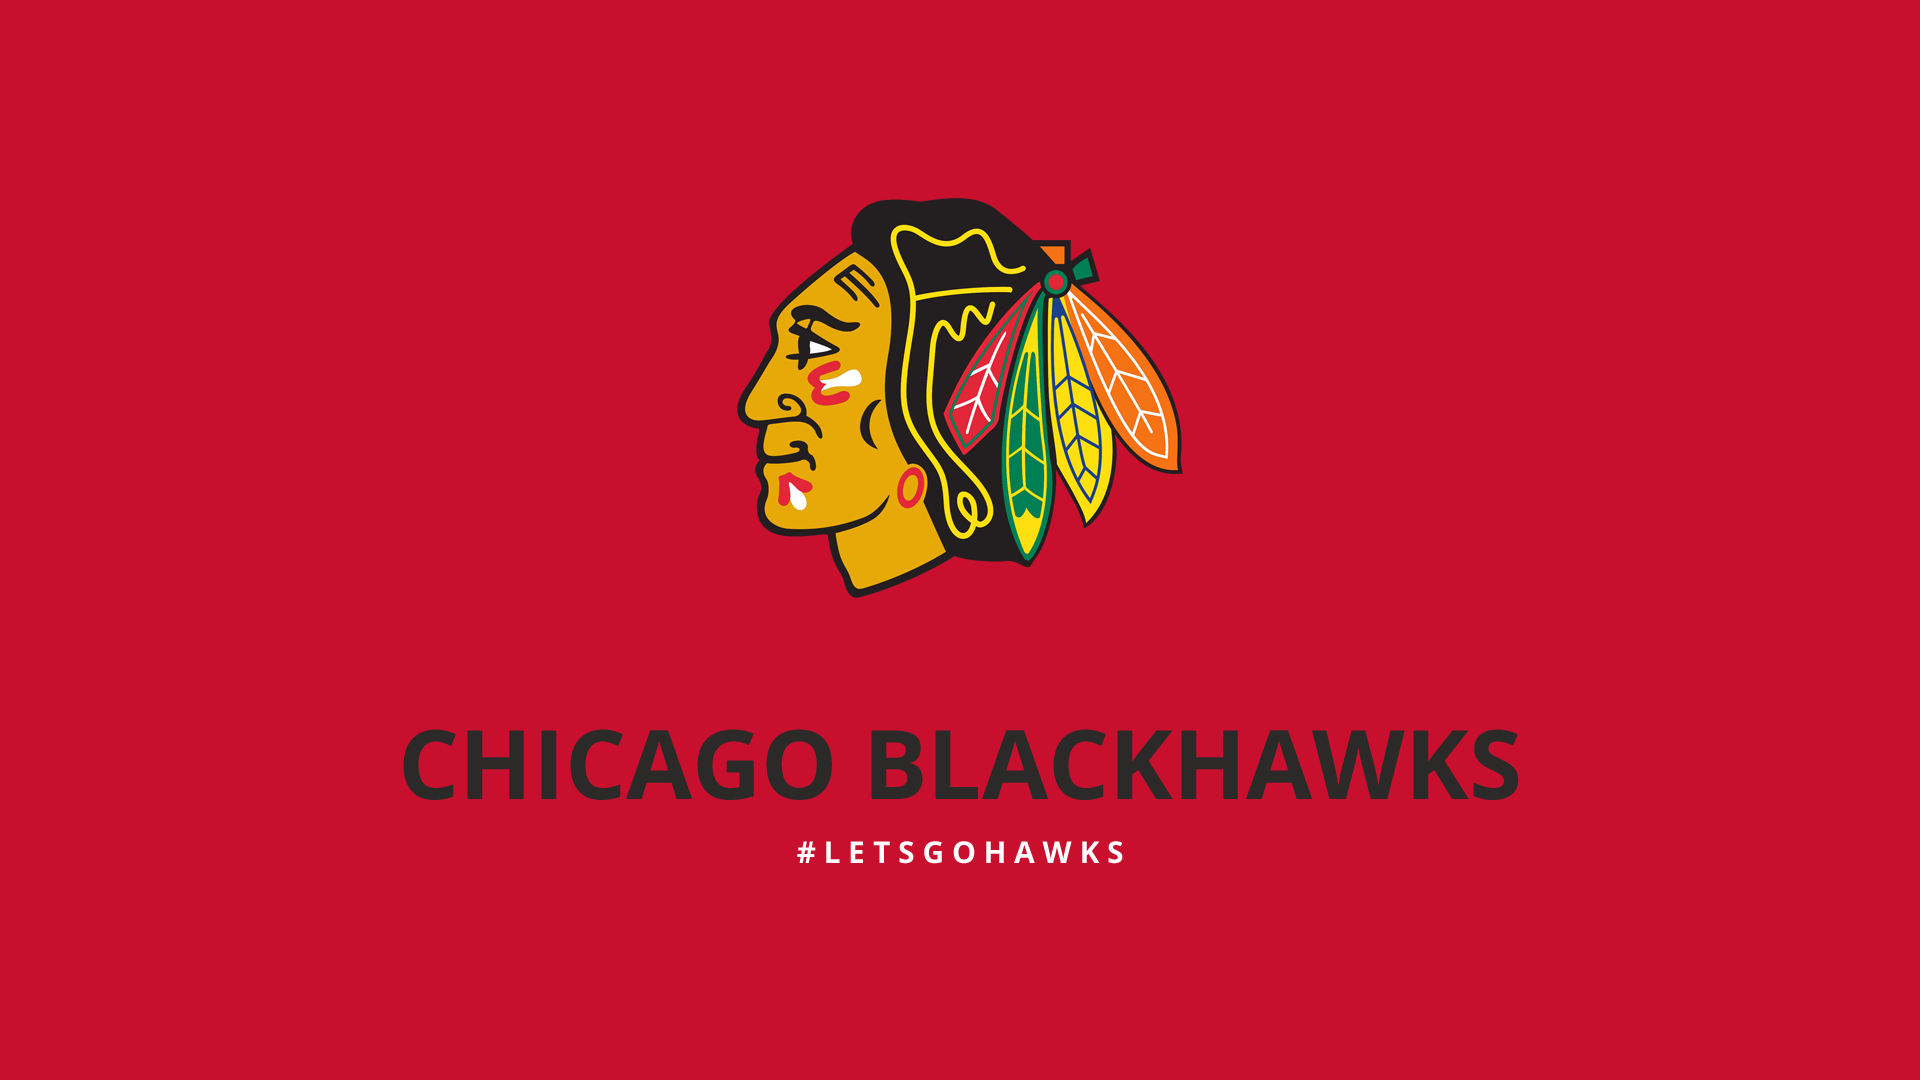 Beautiful Chicago Blackhawks Wallpaper Full HD Pictures